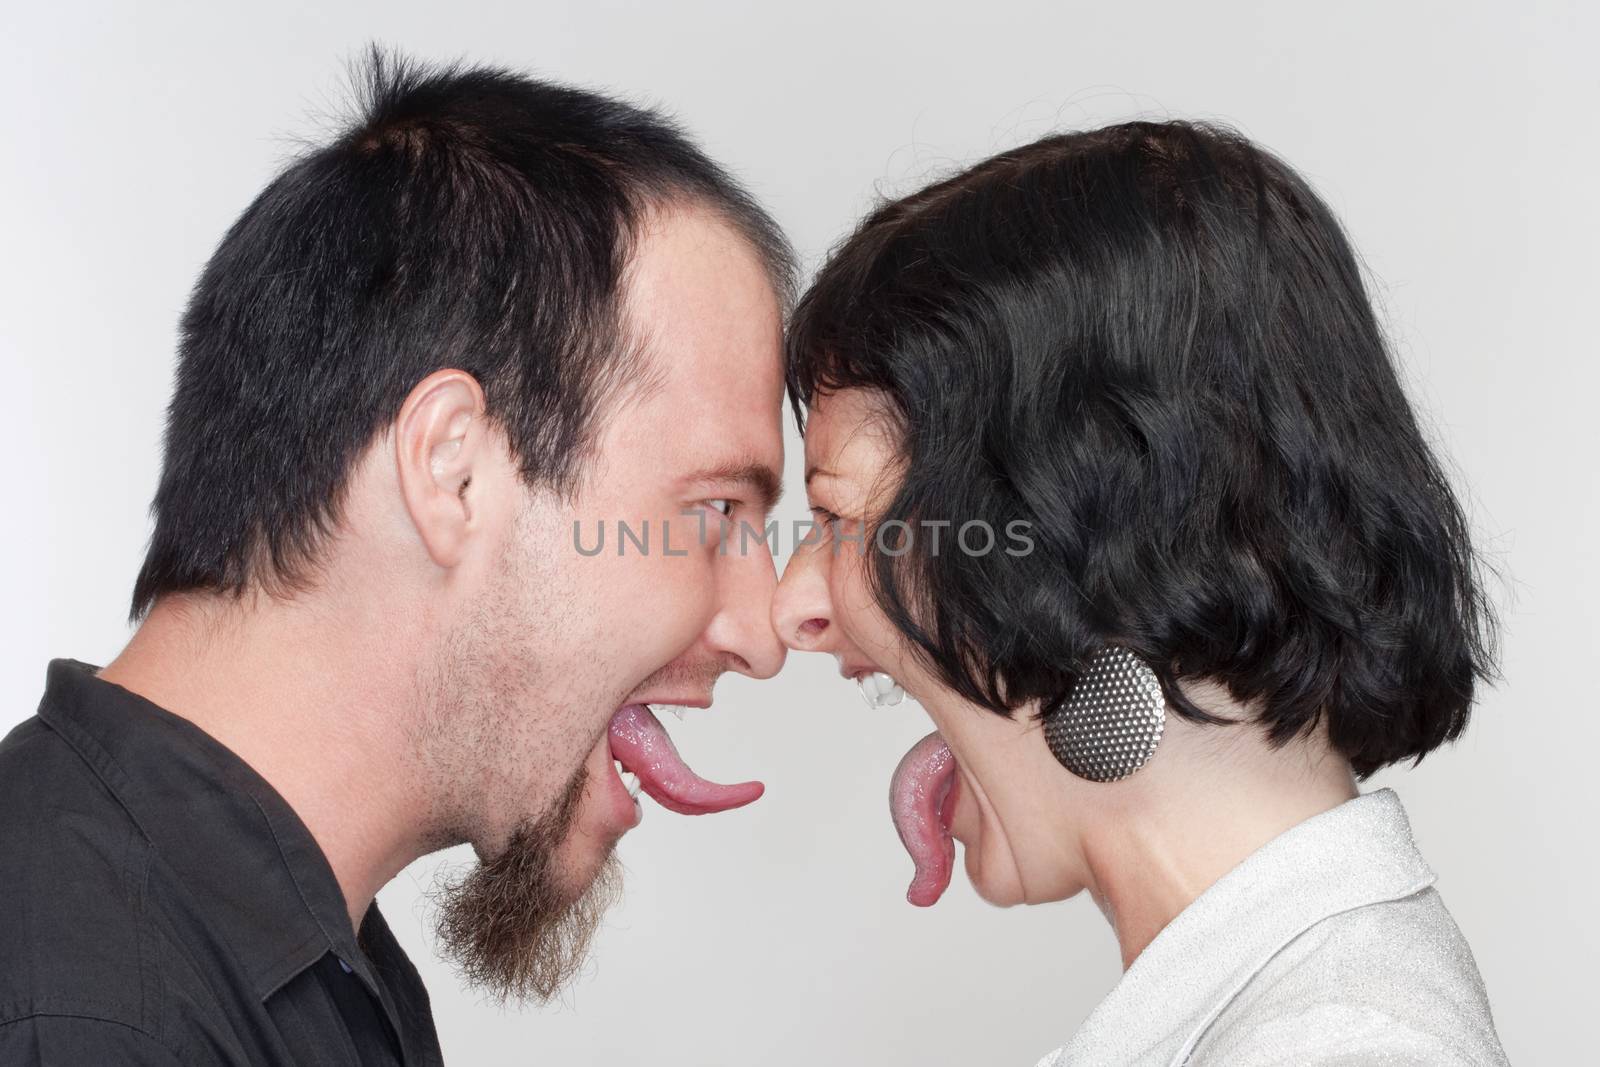 couple sticking out their tongues at each other - isolated on white